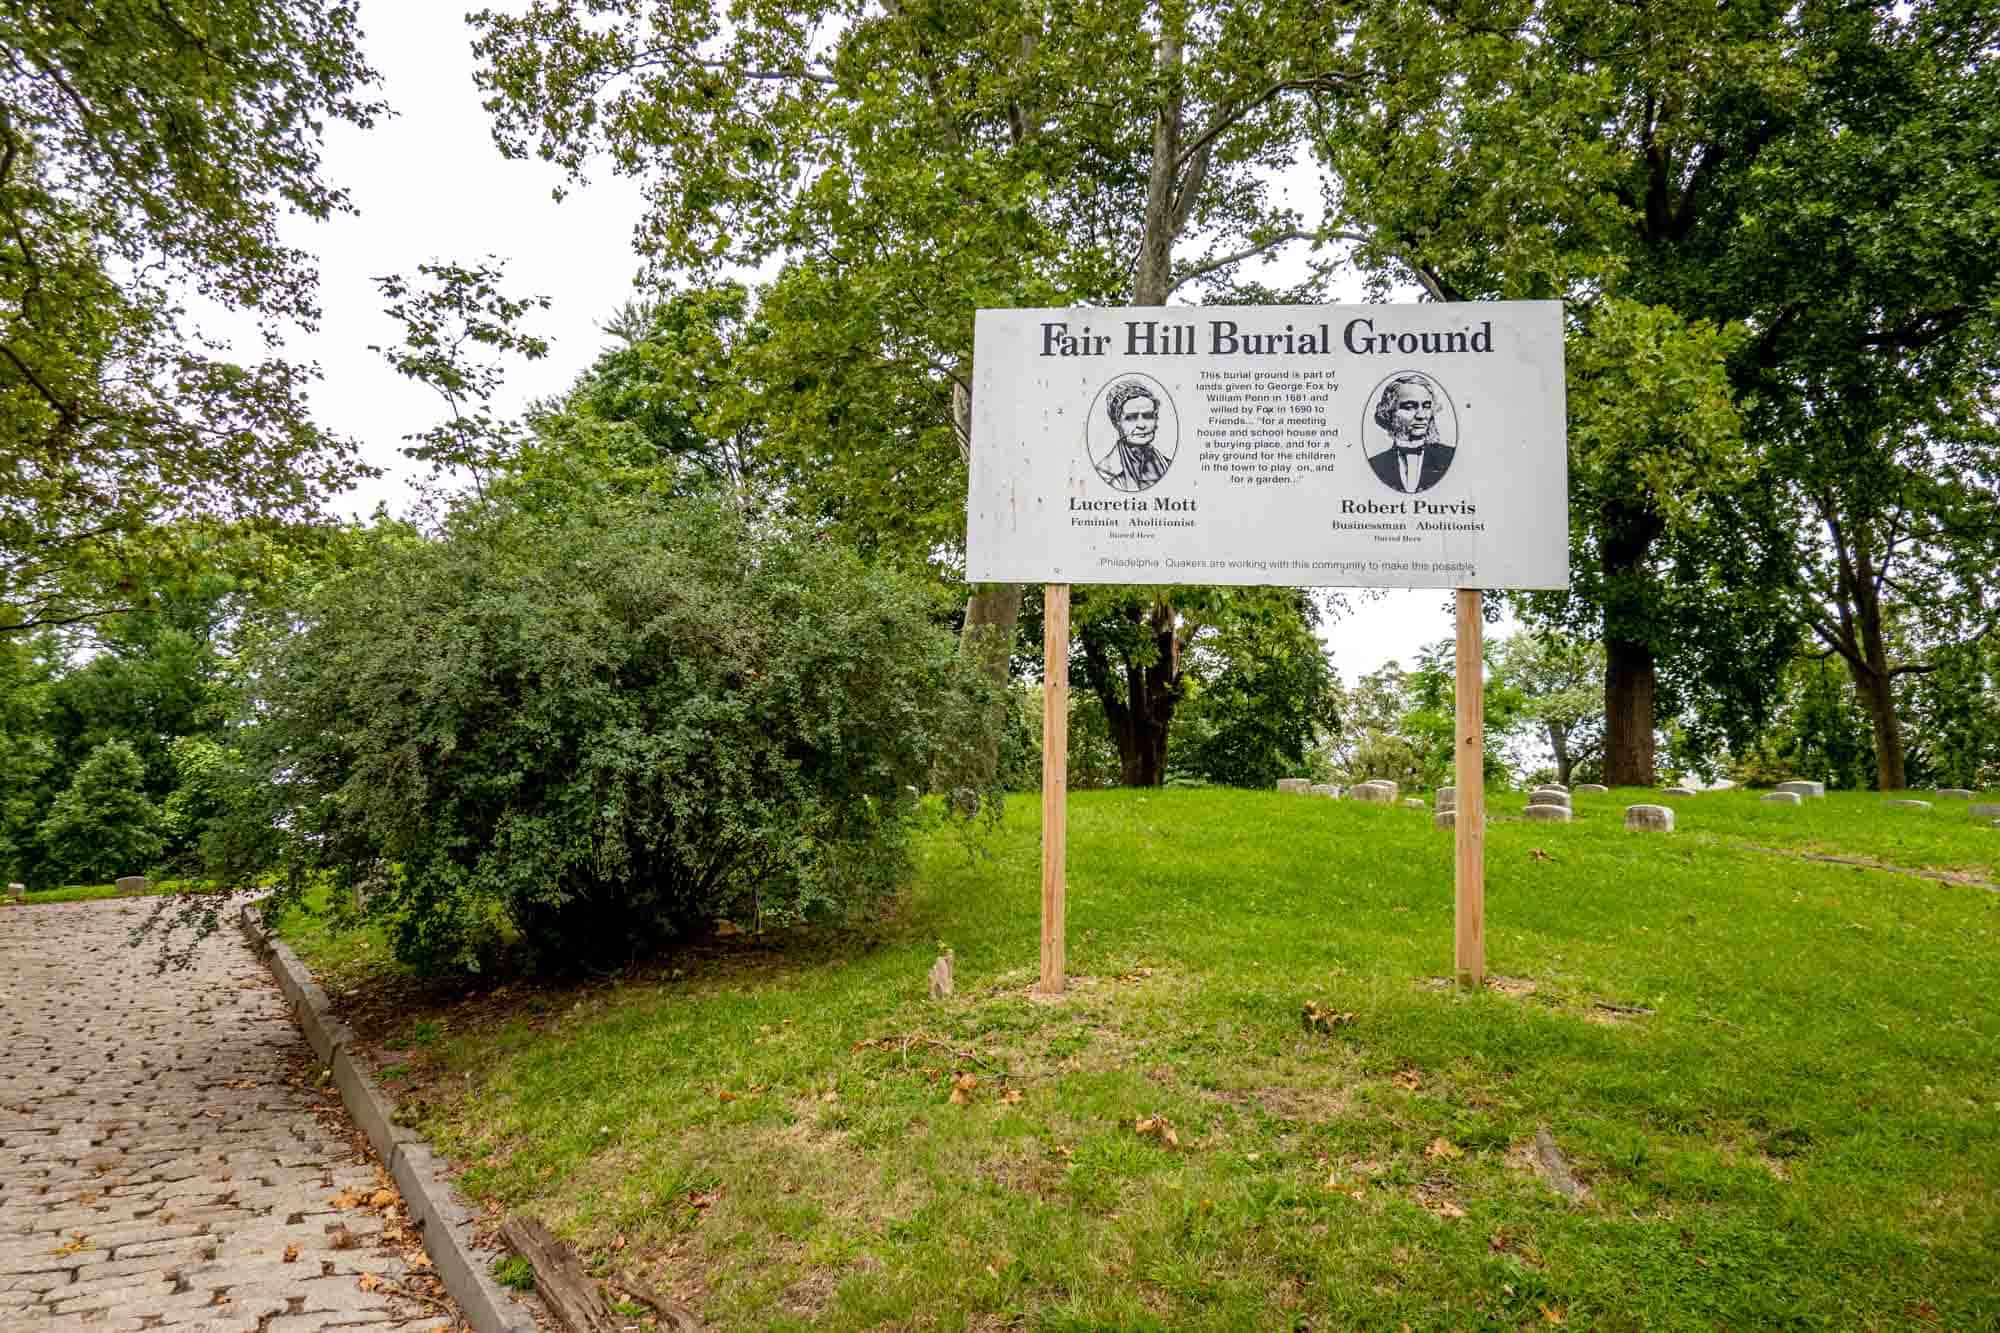 Sign at Fair Hill Burial Ground with portraits of Lucretia Mott and Robert Purvis